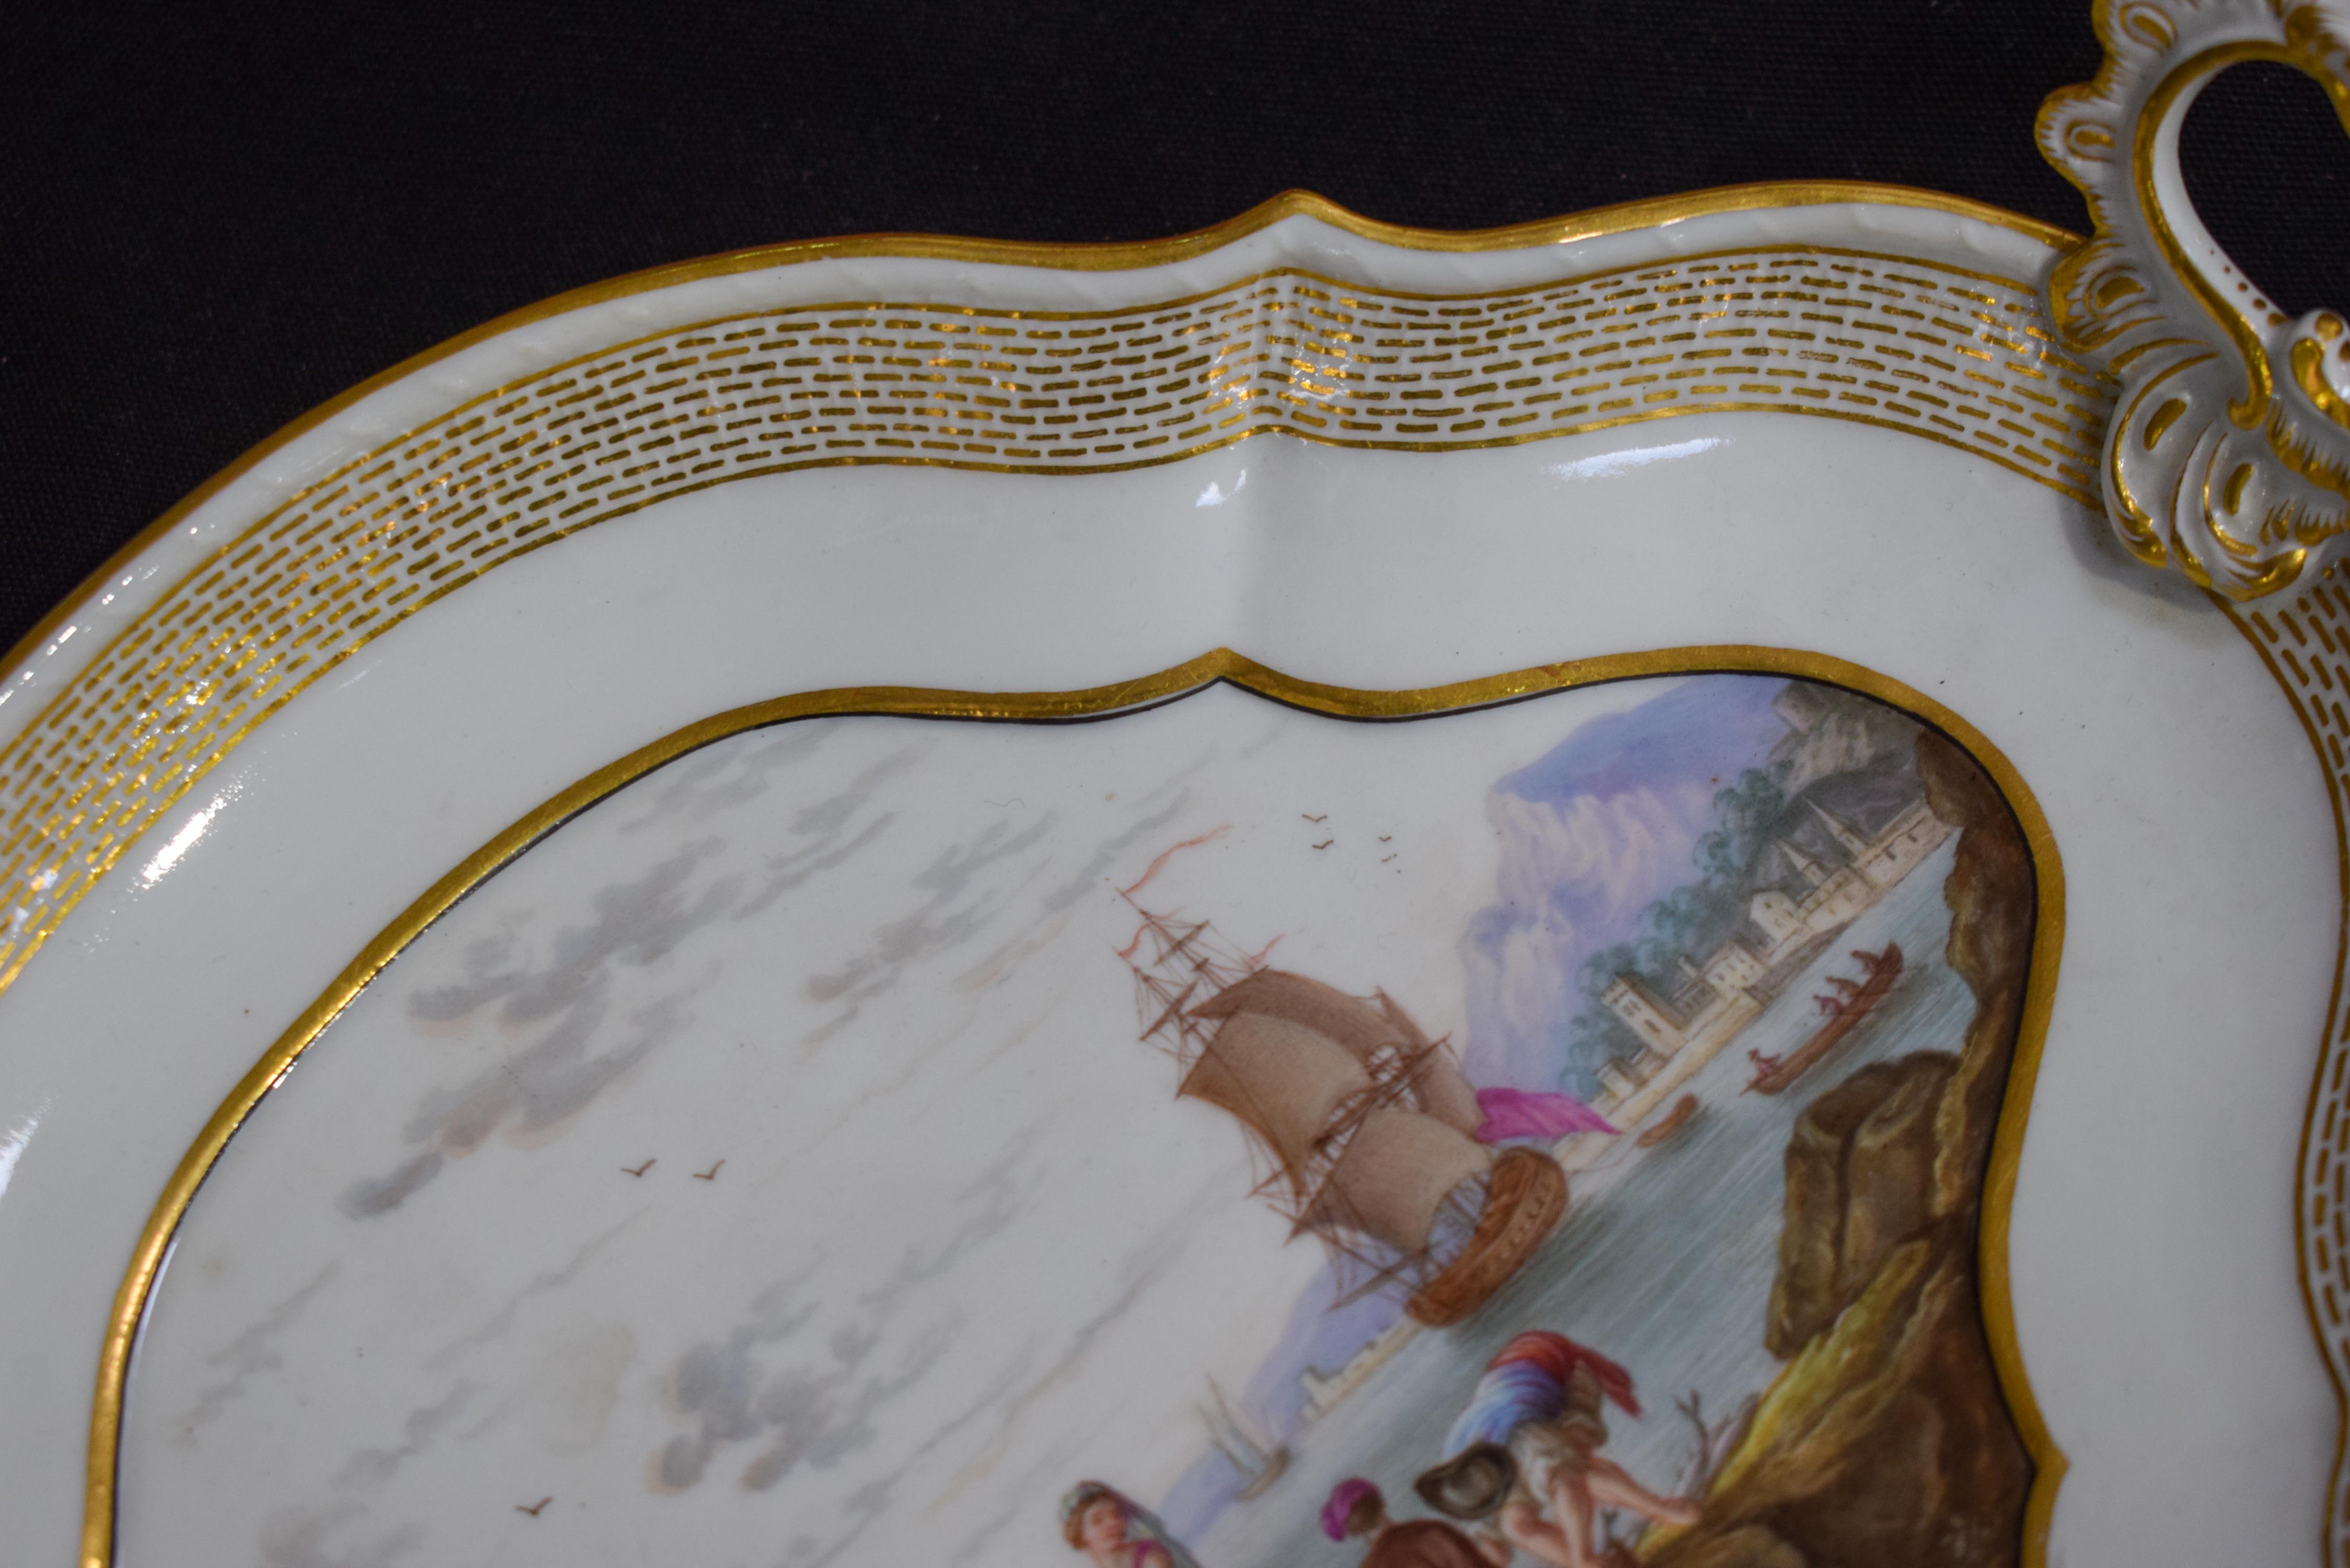 A FINE PAIR OF 18TH/19TH CENTURY MEISSEN TWIN HANDLED PORCELAIN DISHES painted with coastal views. 2 - Image 6 of 19